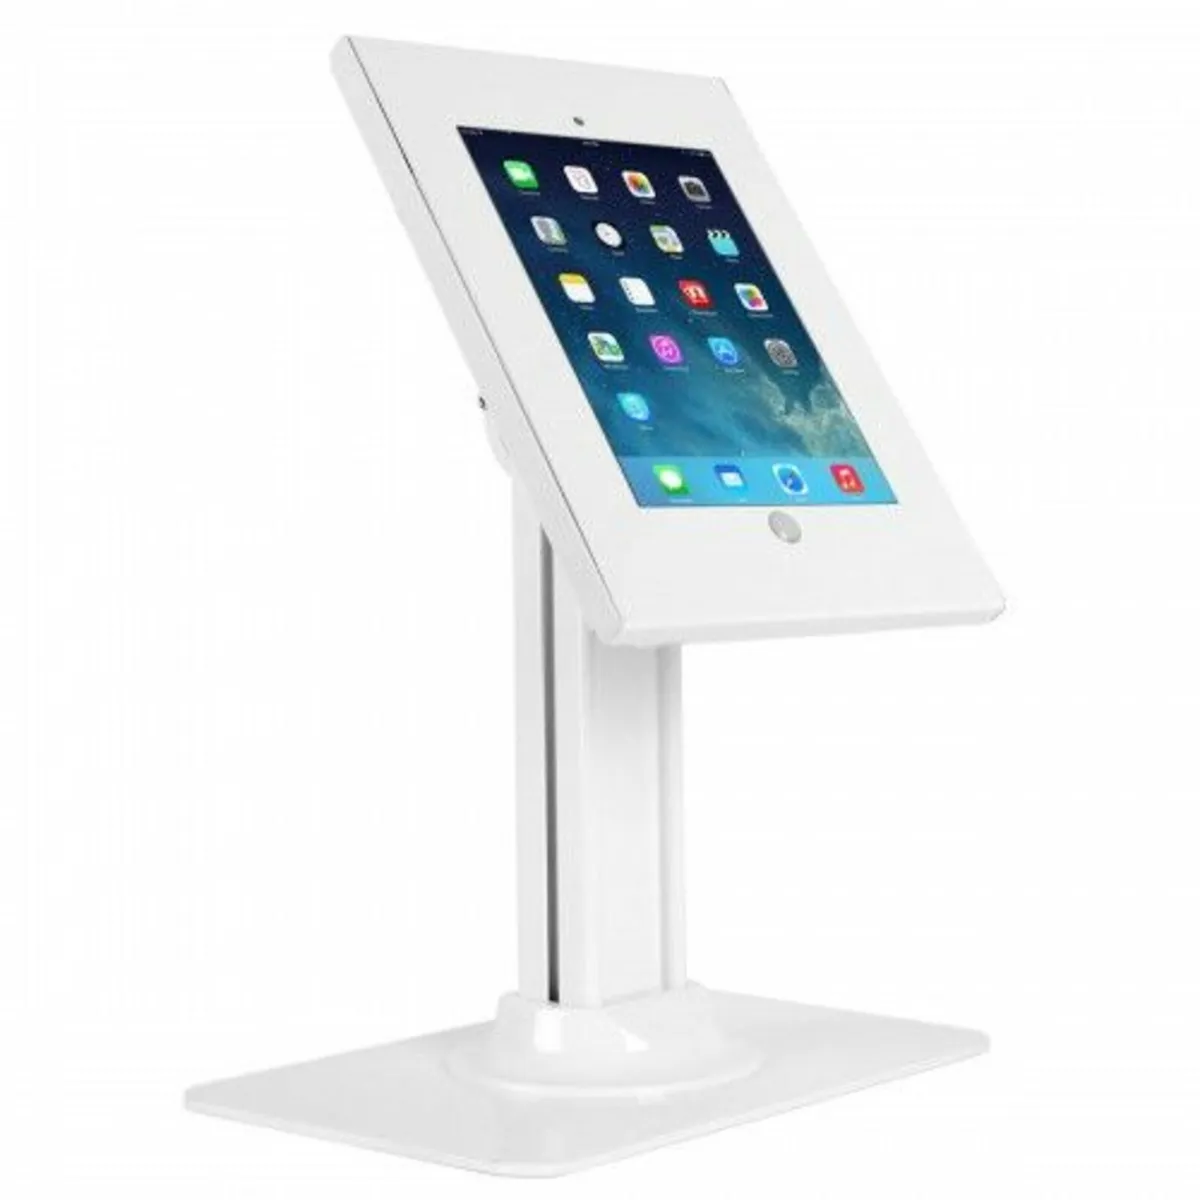 ipad/tablet stands ideal for queueing systems